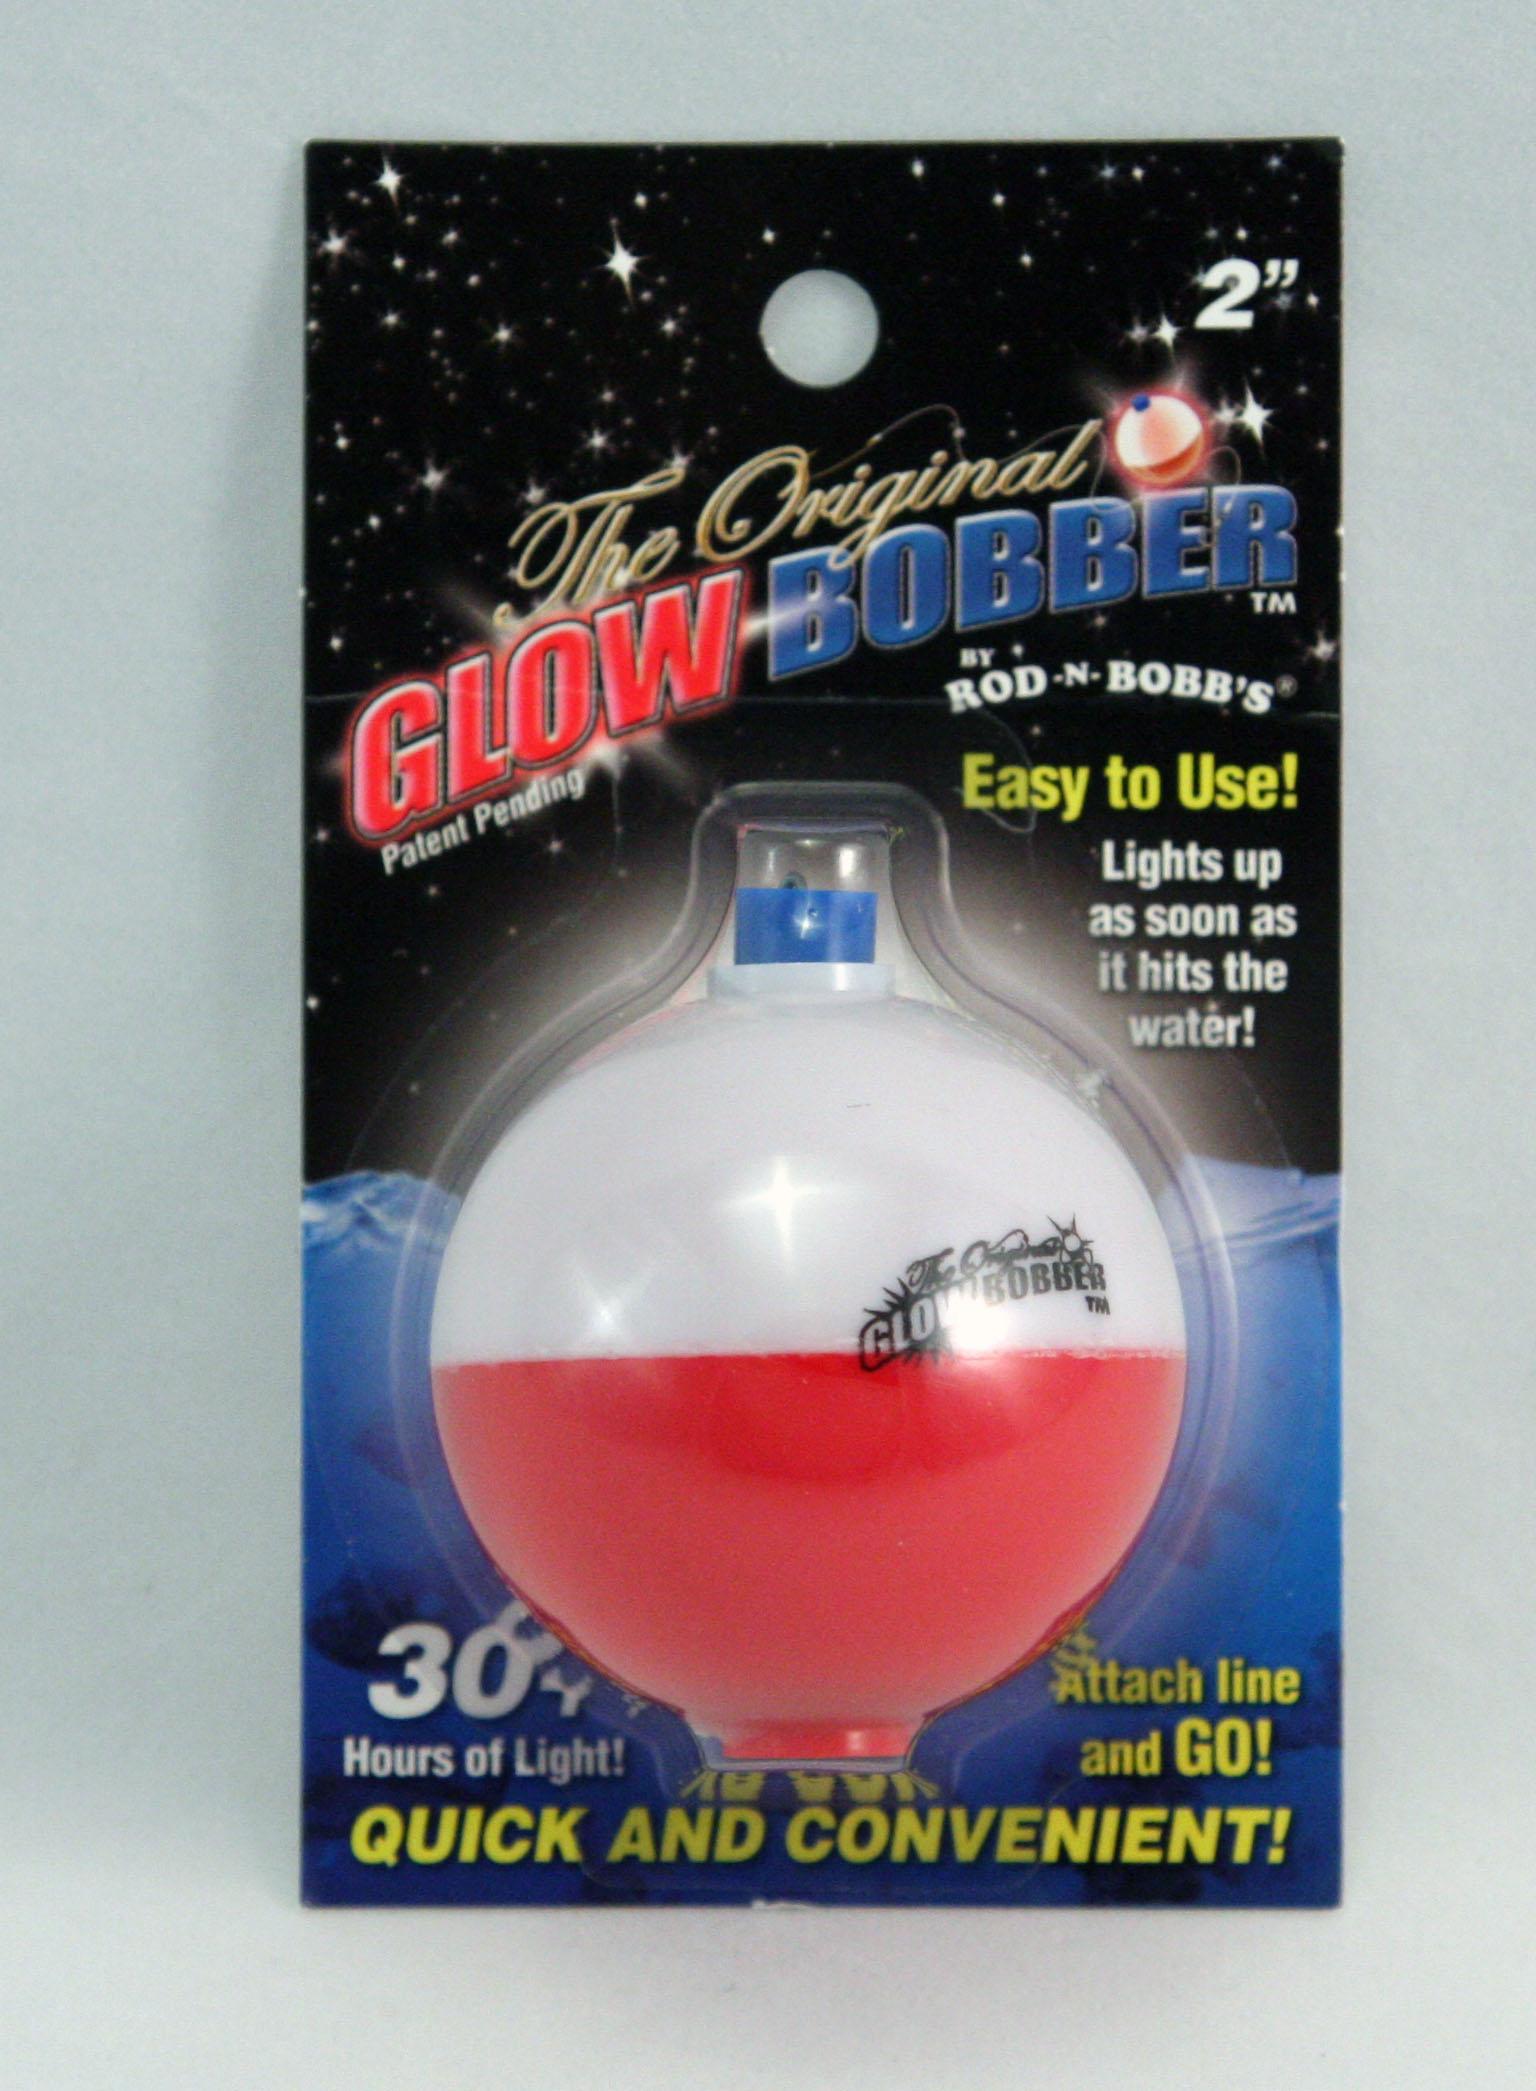 Rod-N-Bobb's Original Glow Bobber, A New Light on an Old Tradition!